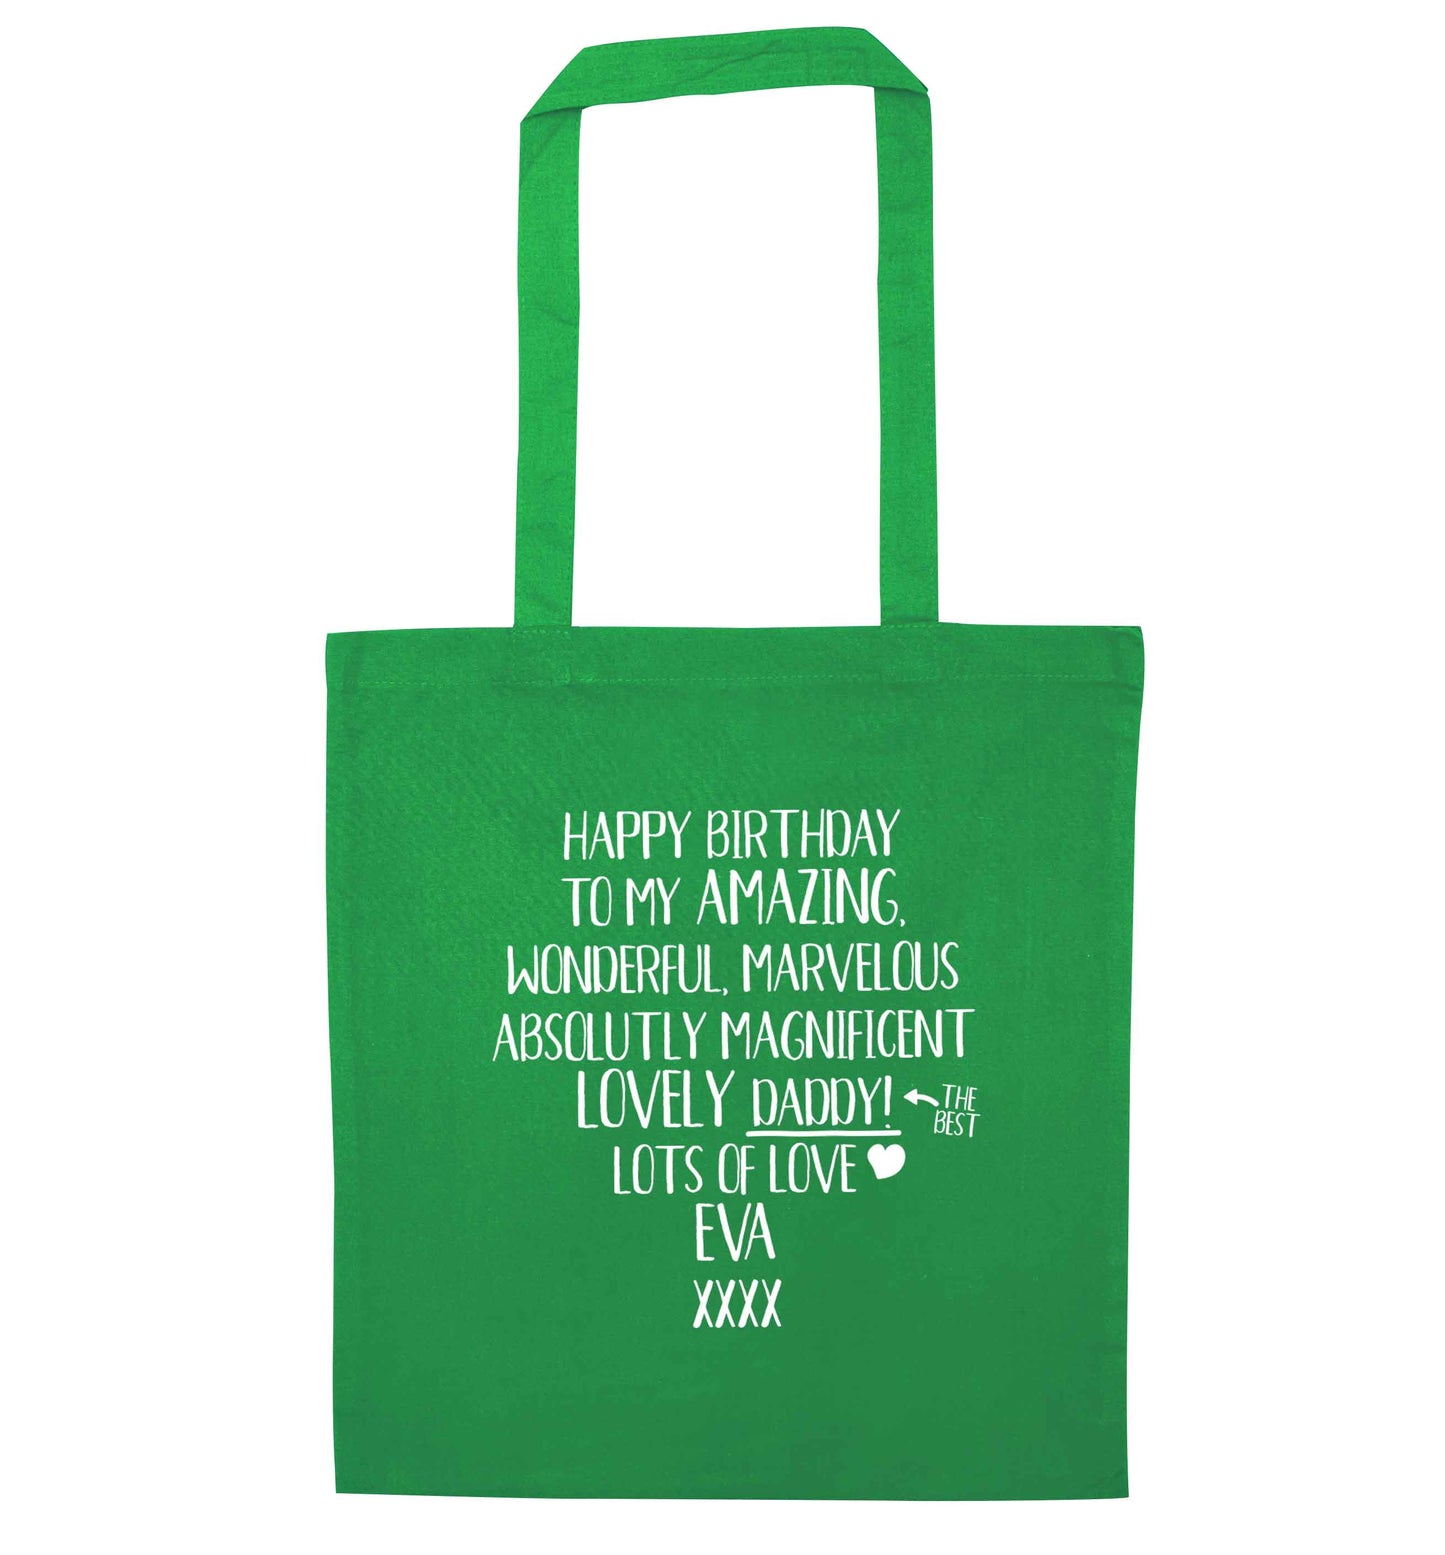 Personalised happy birthday to my amazing, wonderful, lovely daddy green tote bag